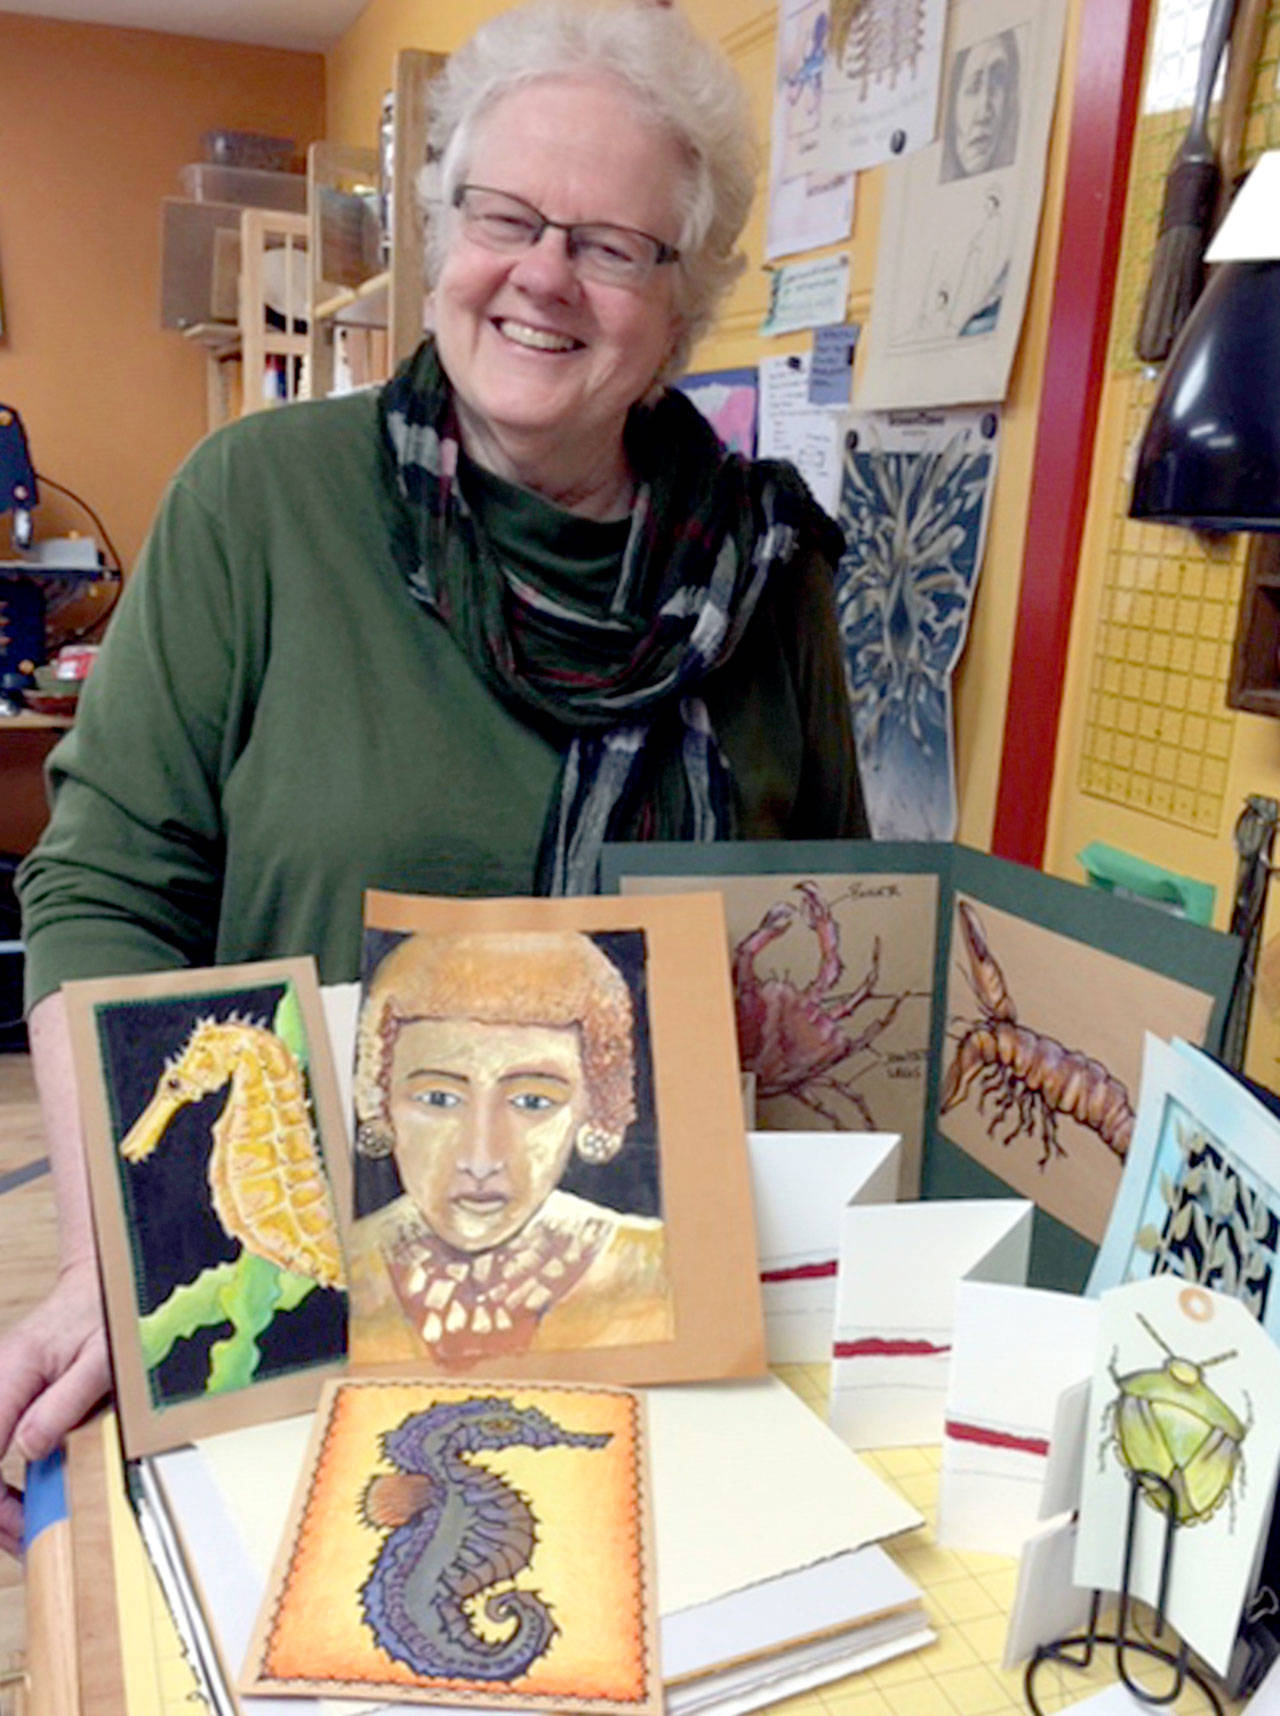 Carolyn Terry of Bainbridge Island will discuss the creation of her works at the Northwind Book Arts Group meeting Wednesday in Port Townsend.